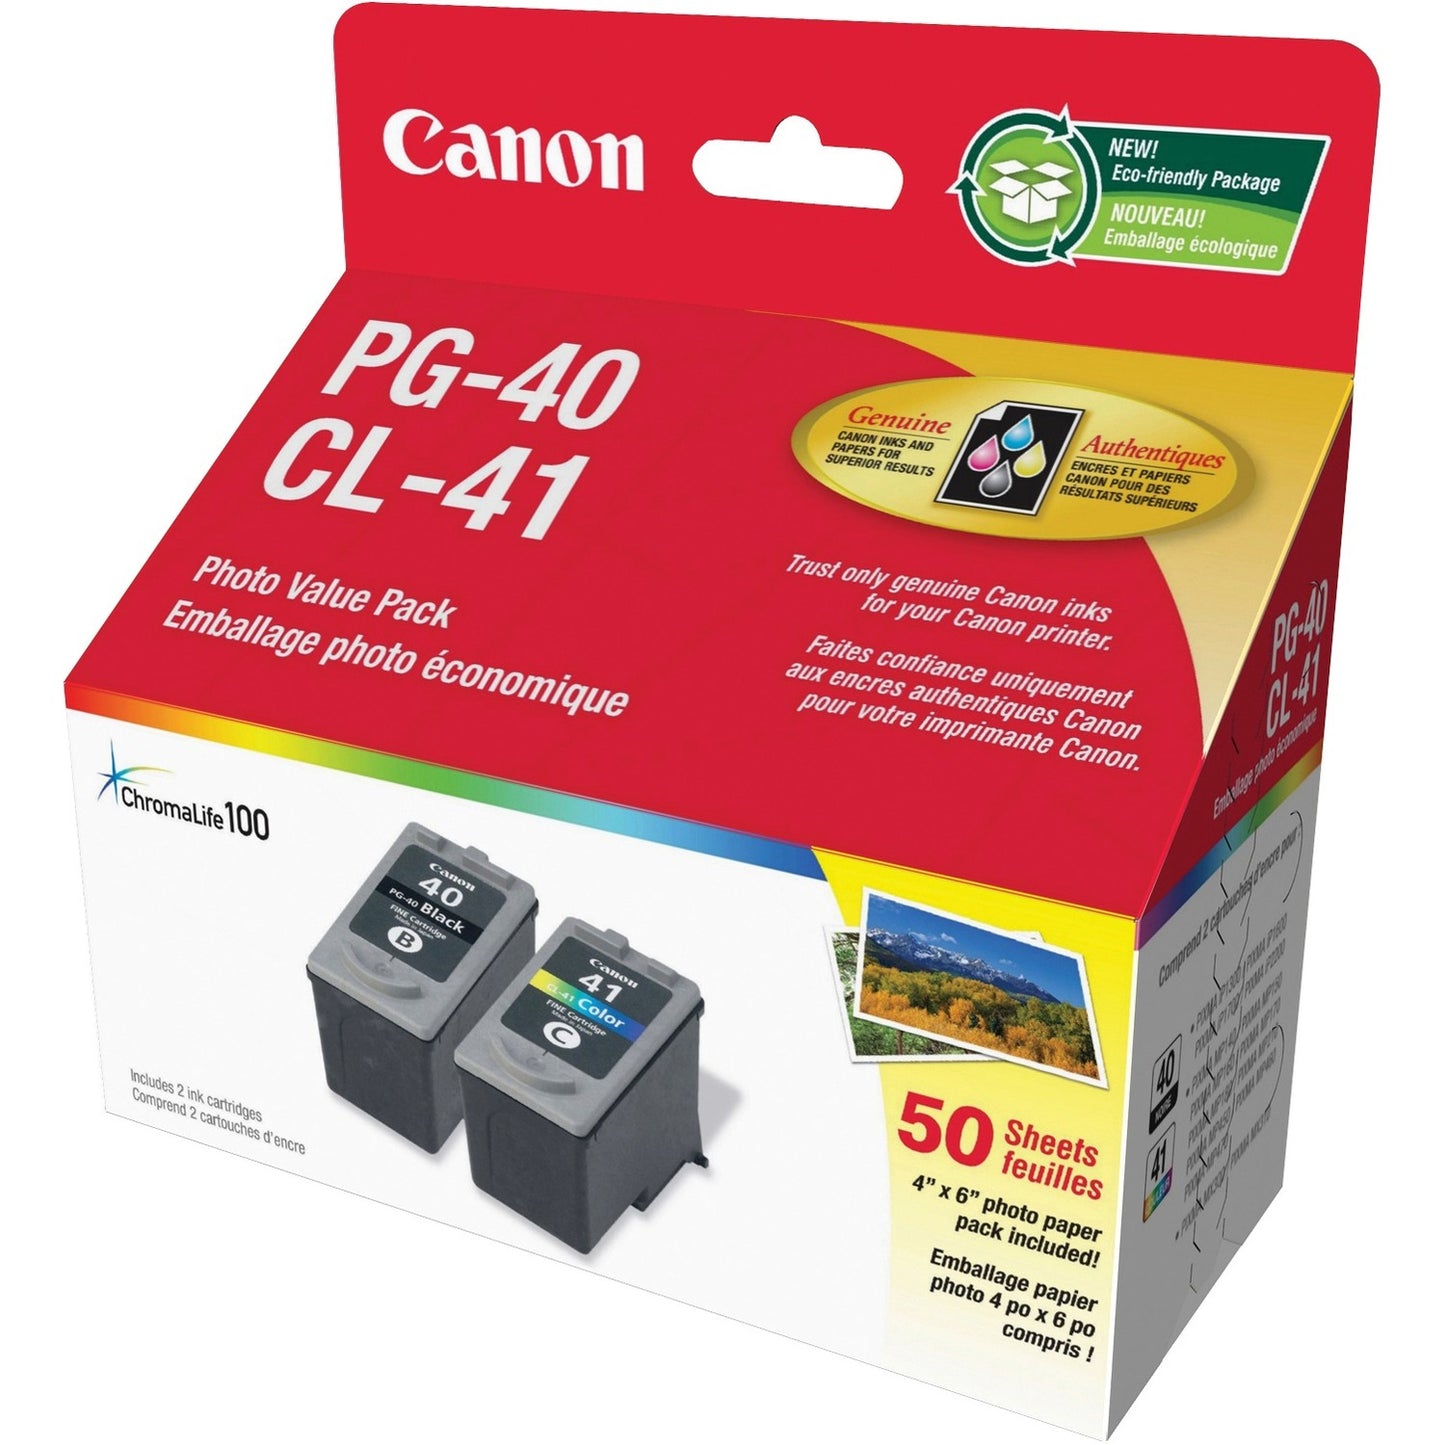 Canon PG-40 Black and CL-41 Tri-color Ink Cartridges